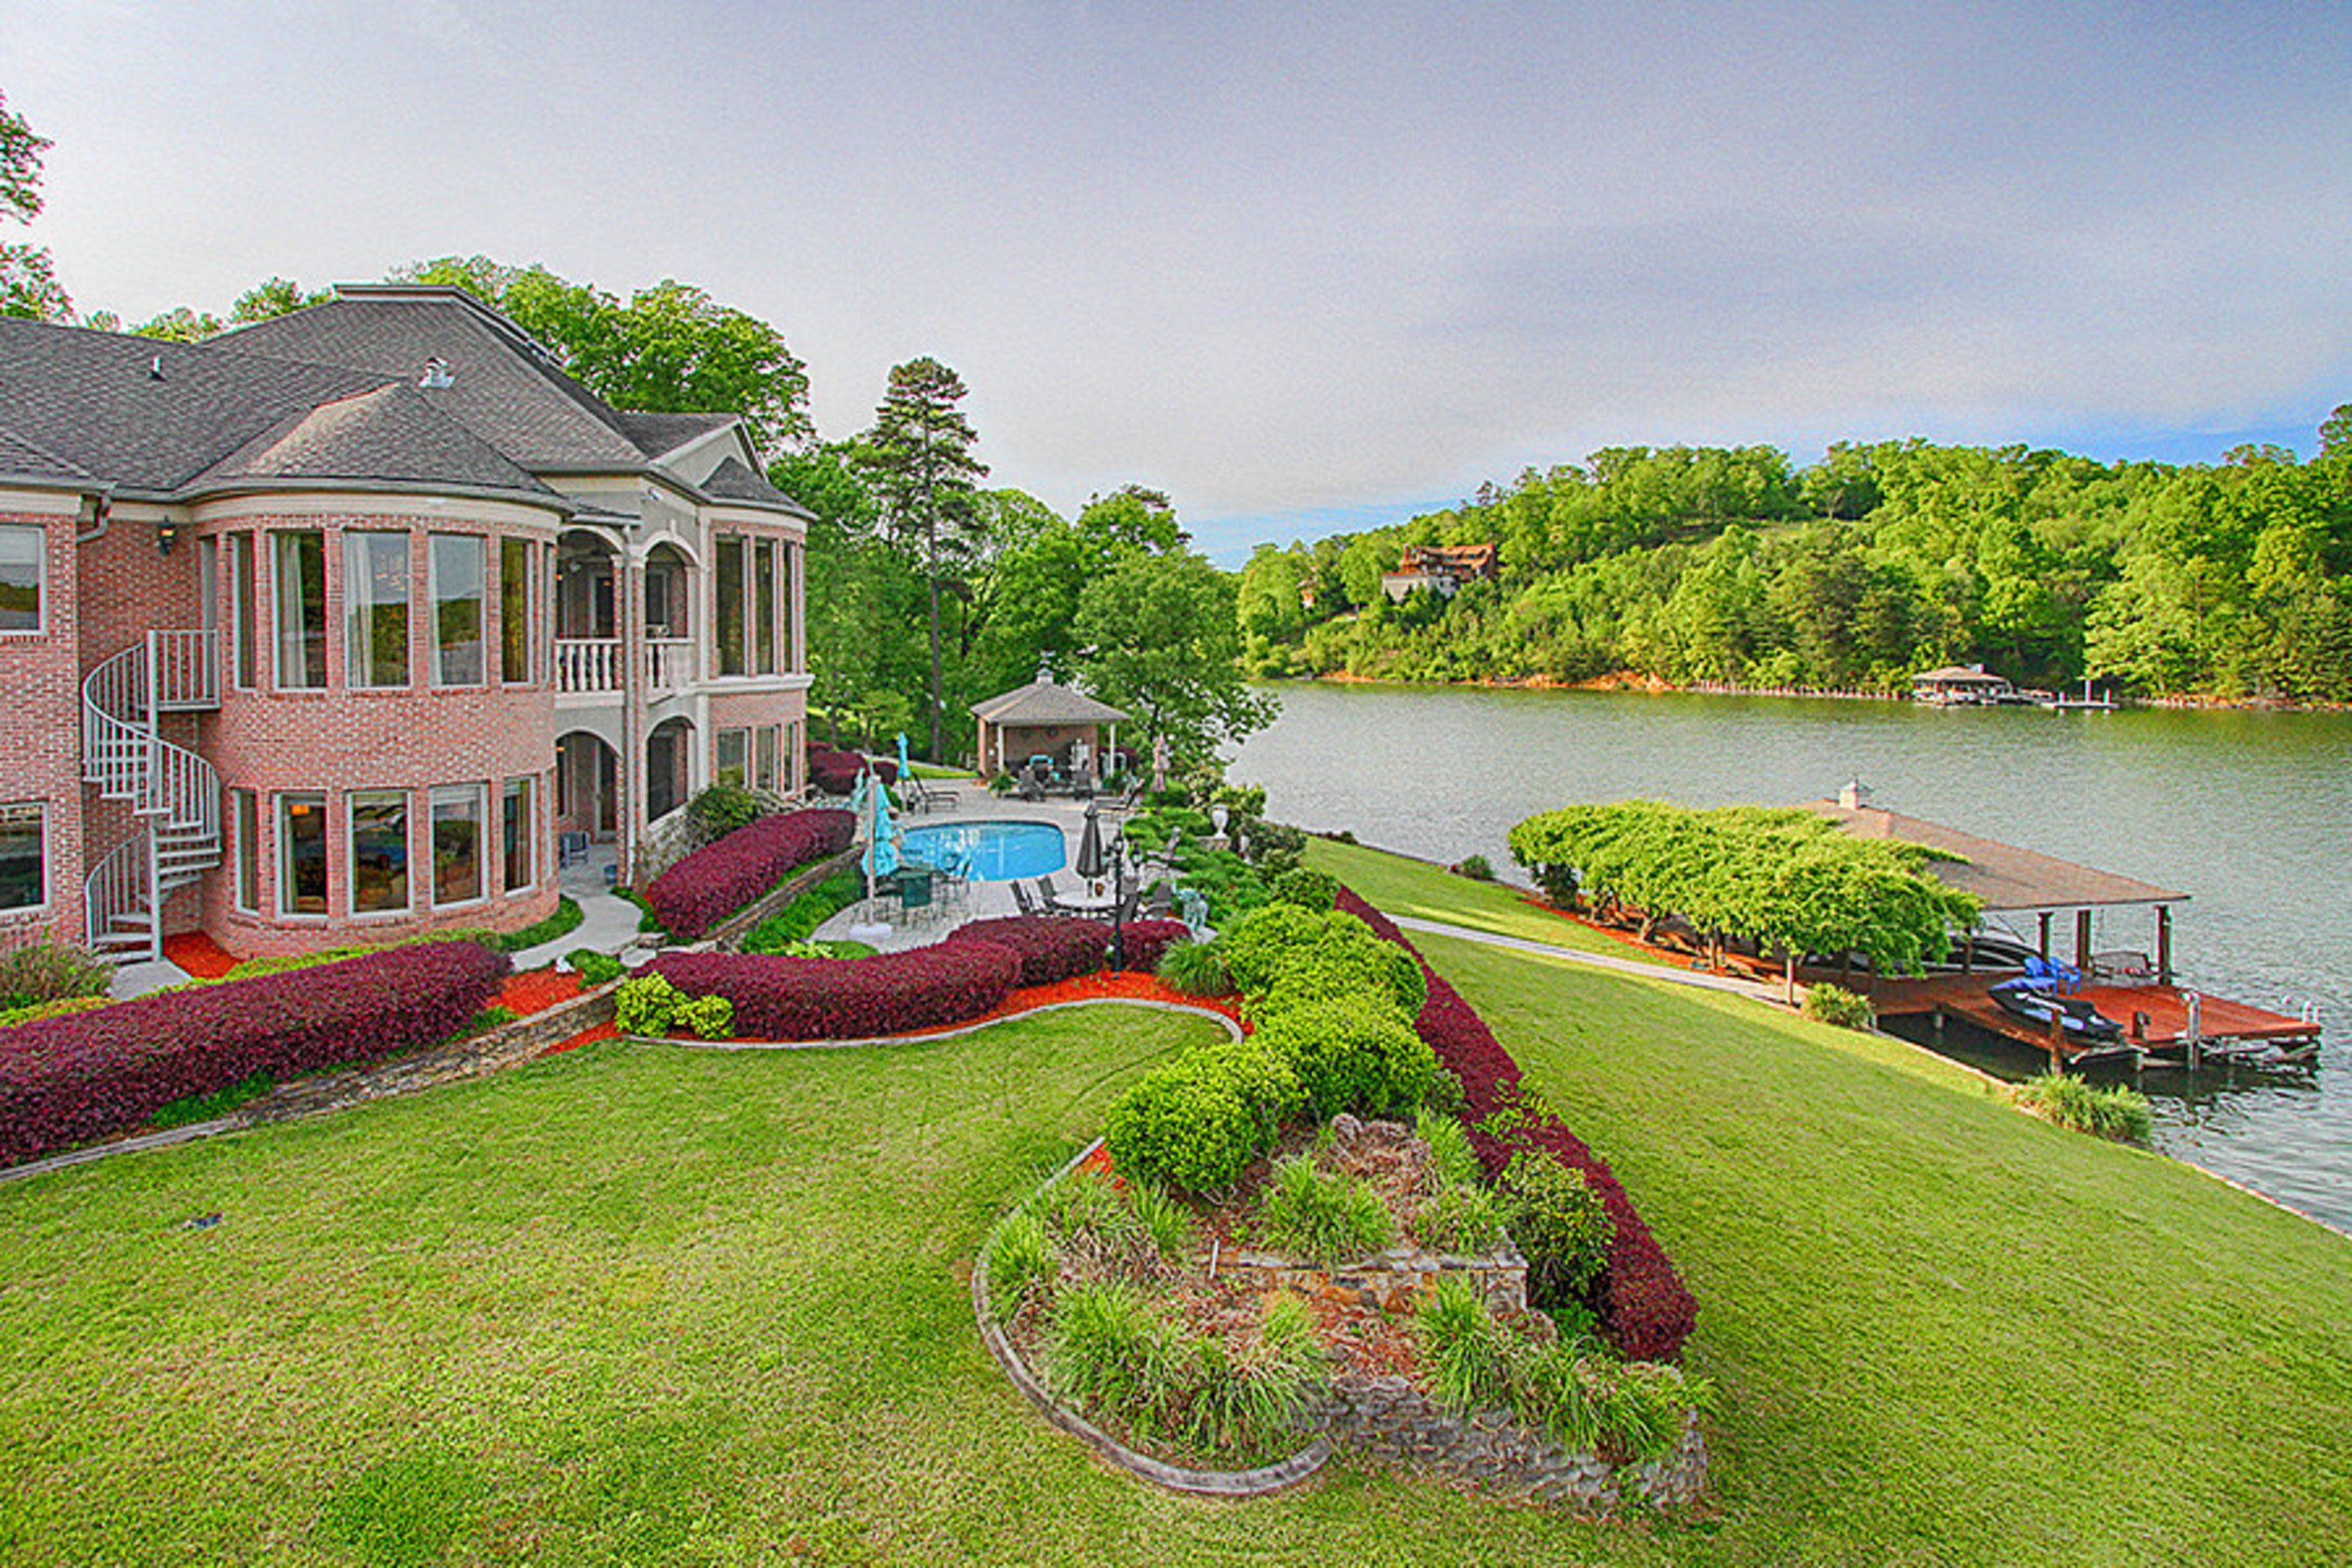 This one-acre, waterfront estate in Hixson, Tennessee, with more than 250 ft. of frontage on Chattanooga's Chickamauga Lake, was sold at a live auction on April 23, 2016 by Platinum Luxury Auctions. The sale was held in cooperation with Alliance Sotheby's International Realty, of Knoxville, TN. The sale is reported to be the second-highest home price on record for the community of Hixson. More at PlatinumLuxuryAuctions.com.